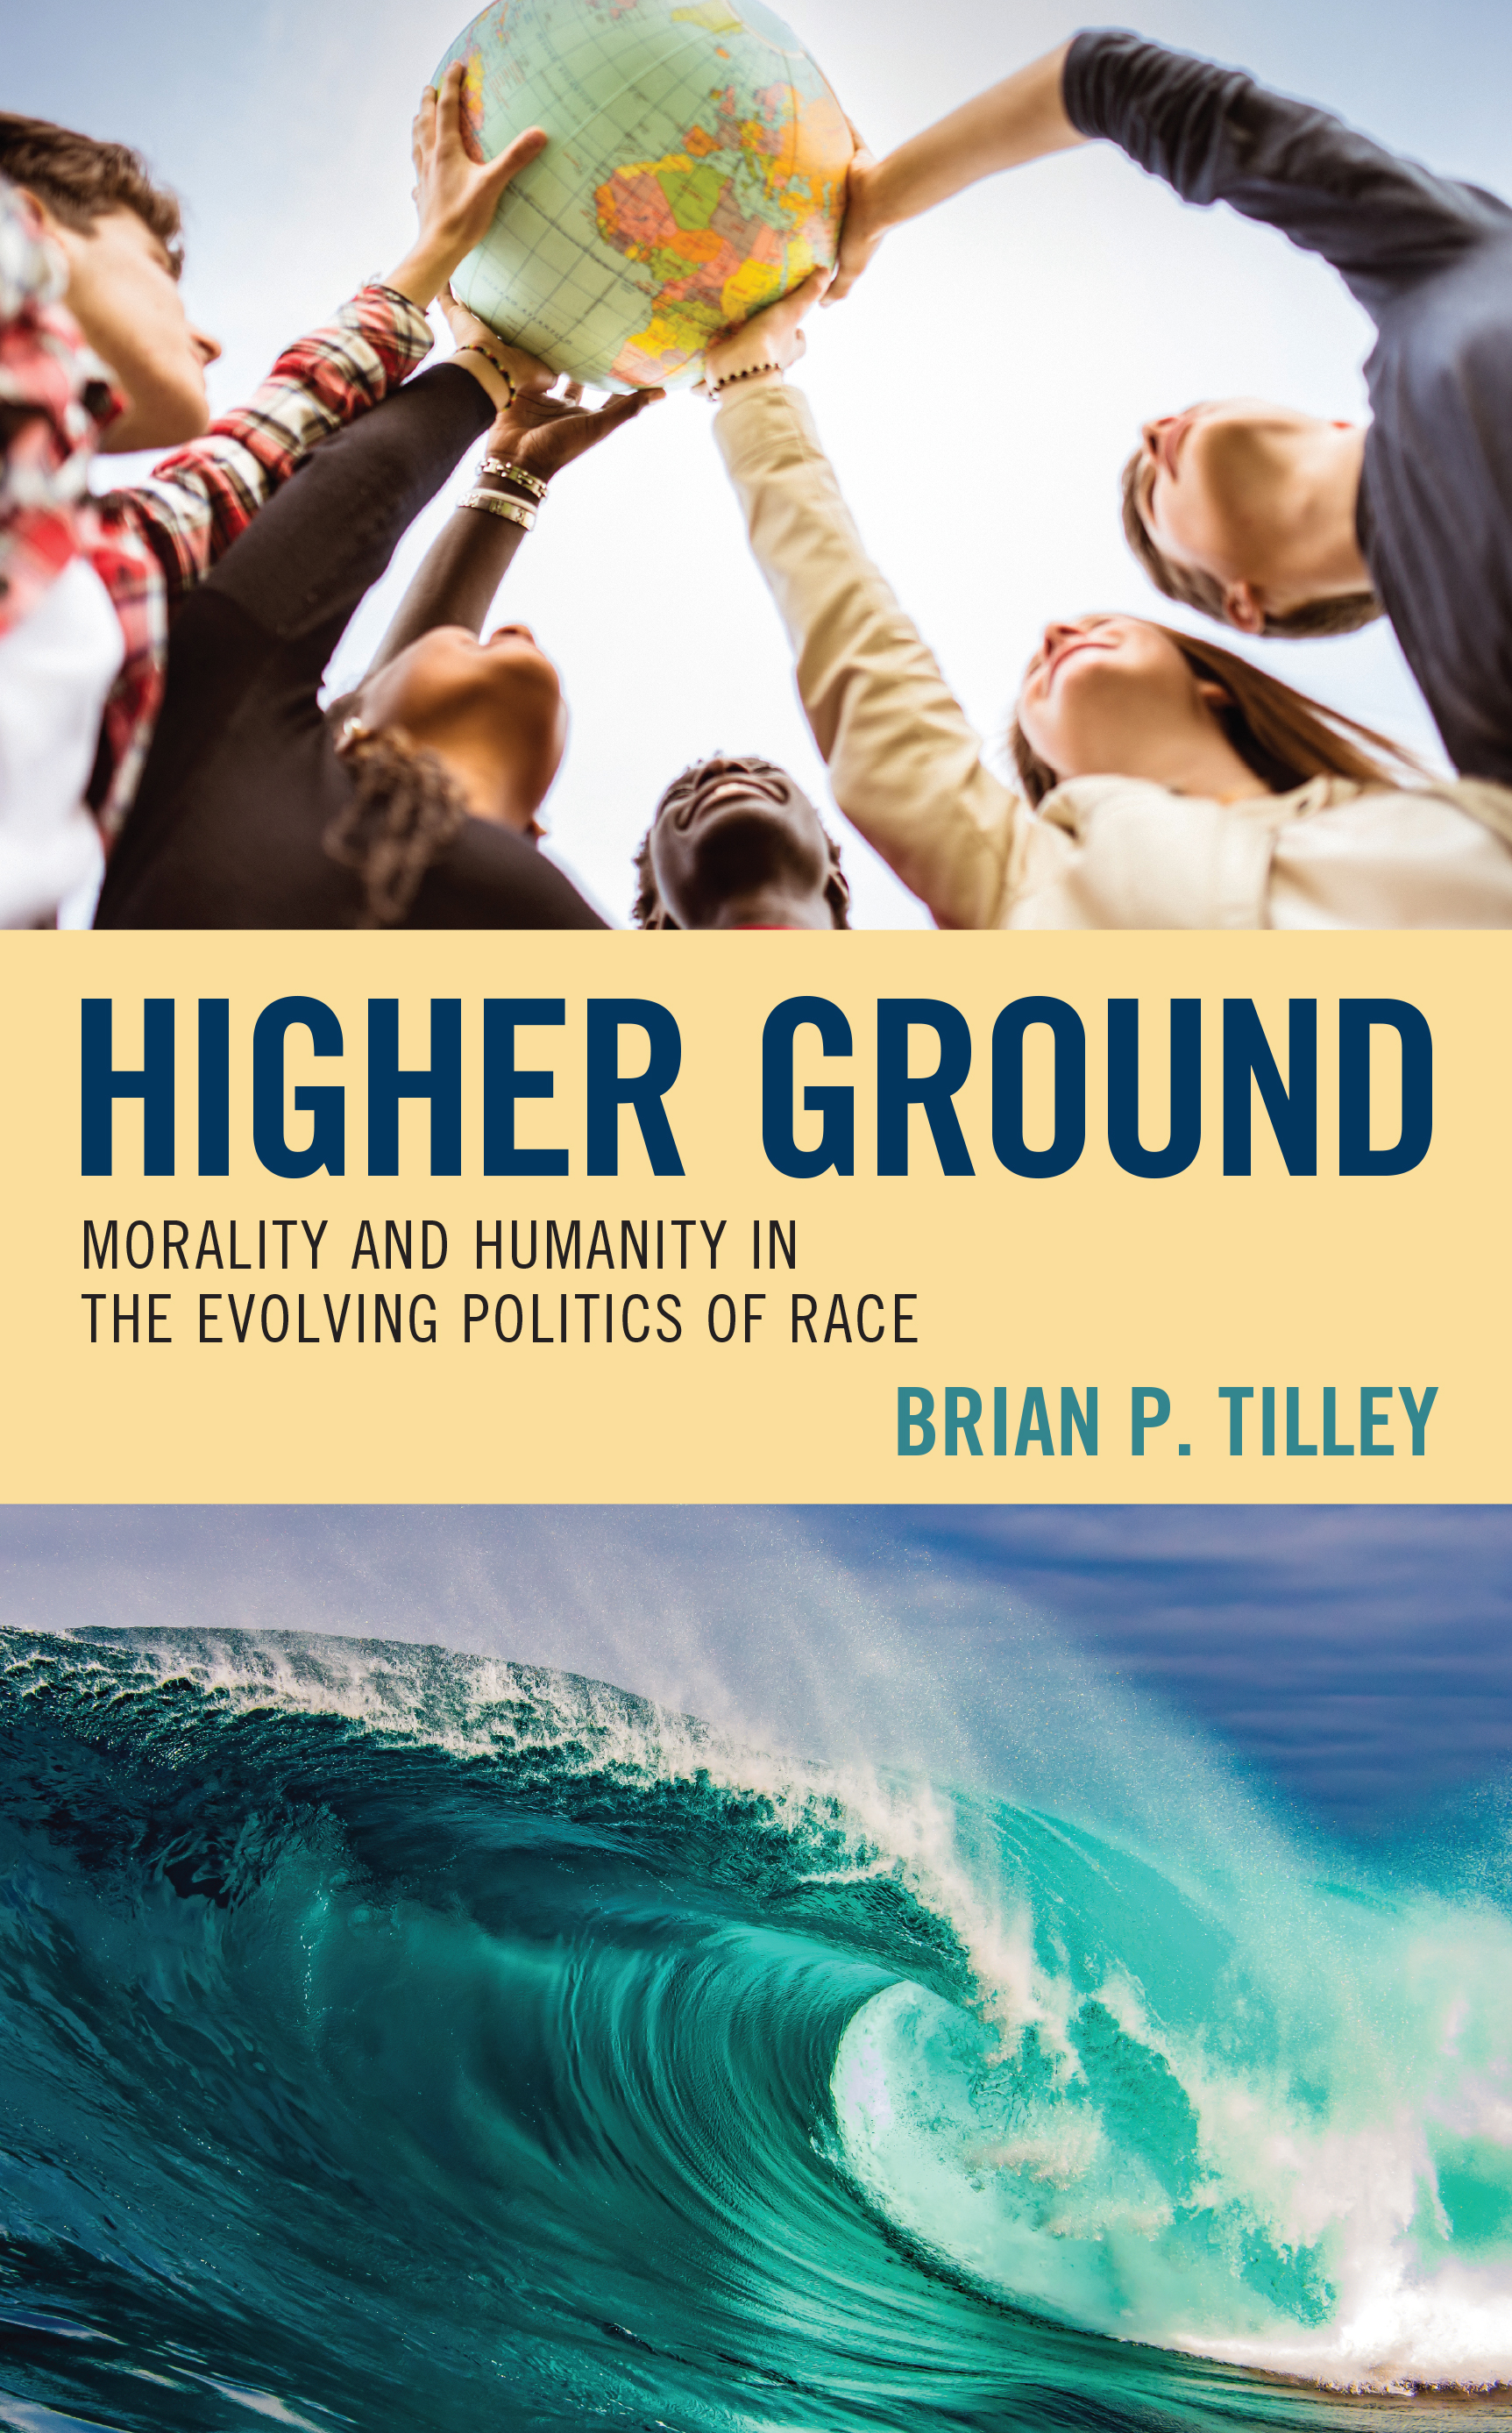 Higher Ground: Morality and Humanity in the Evolving Politics of Race